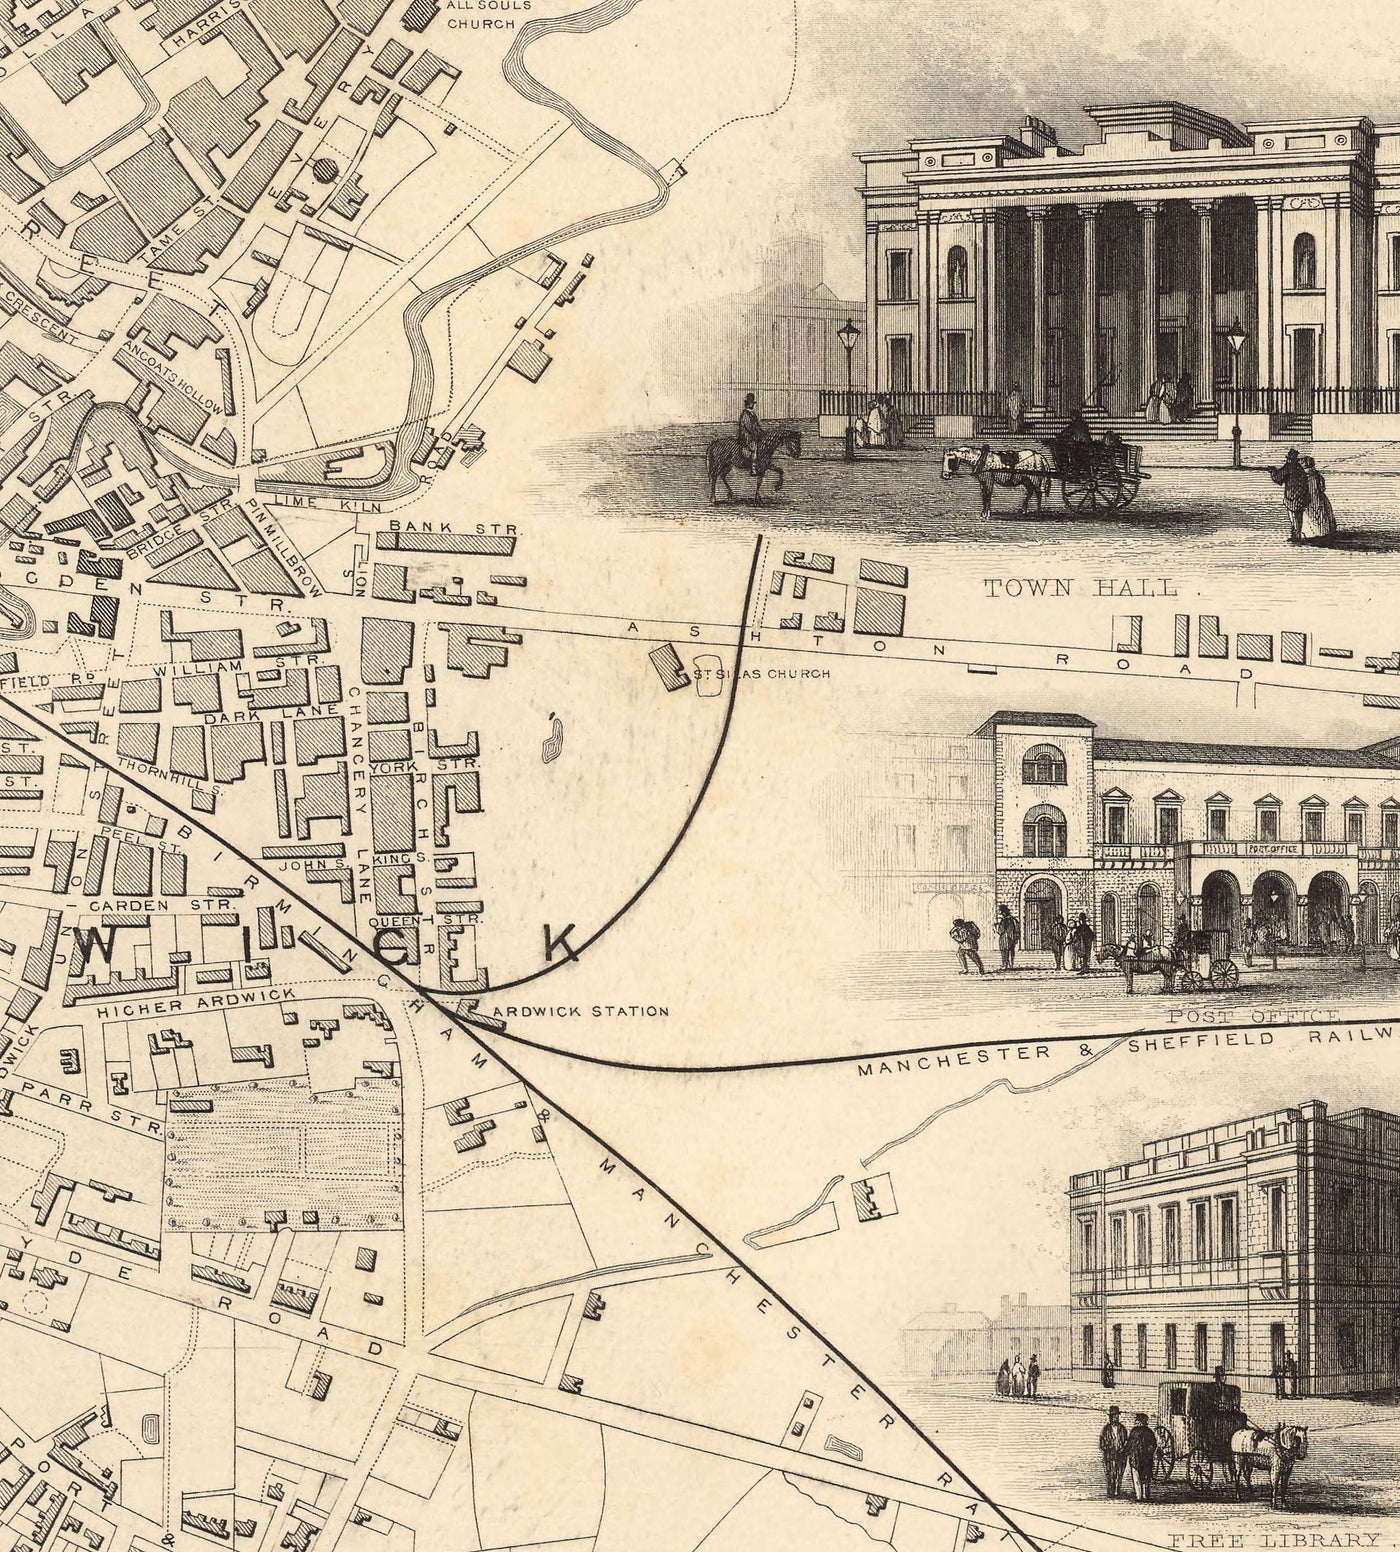 Old Map of Manchester and Environs by John Rapkin, 1851 - Town Hall, Royal Infirmary, Train Stations